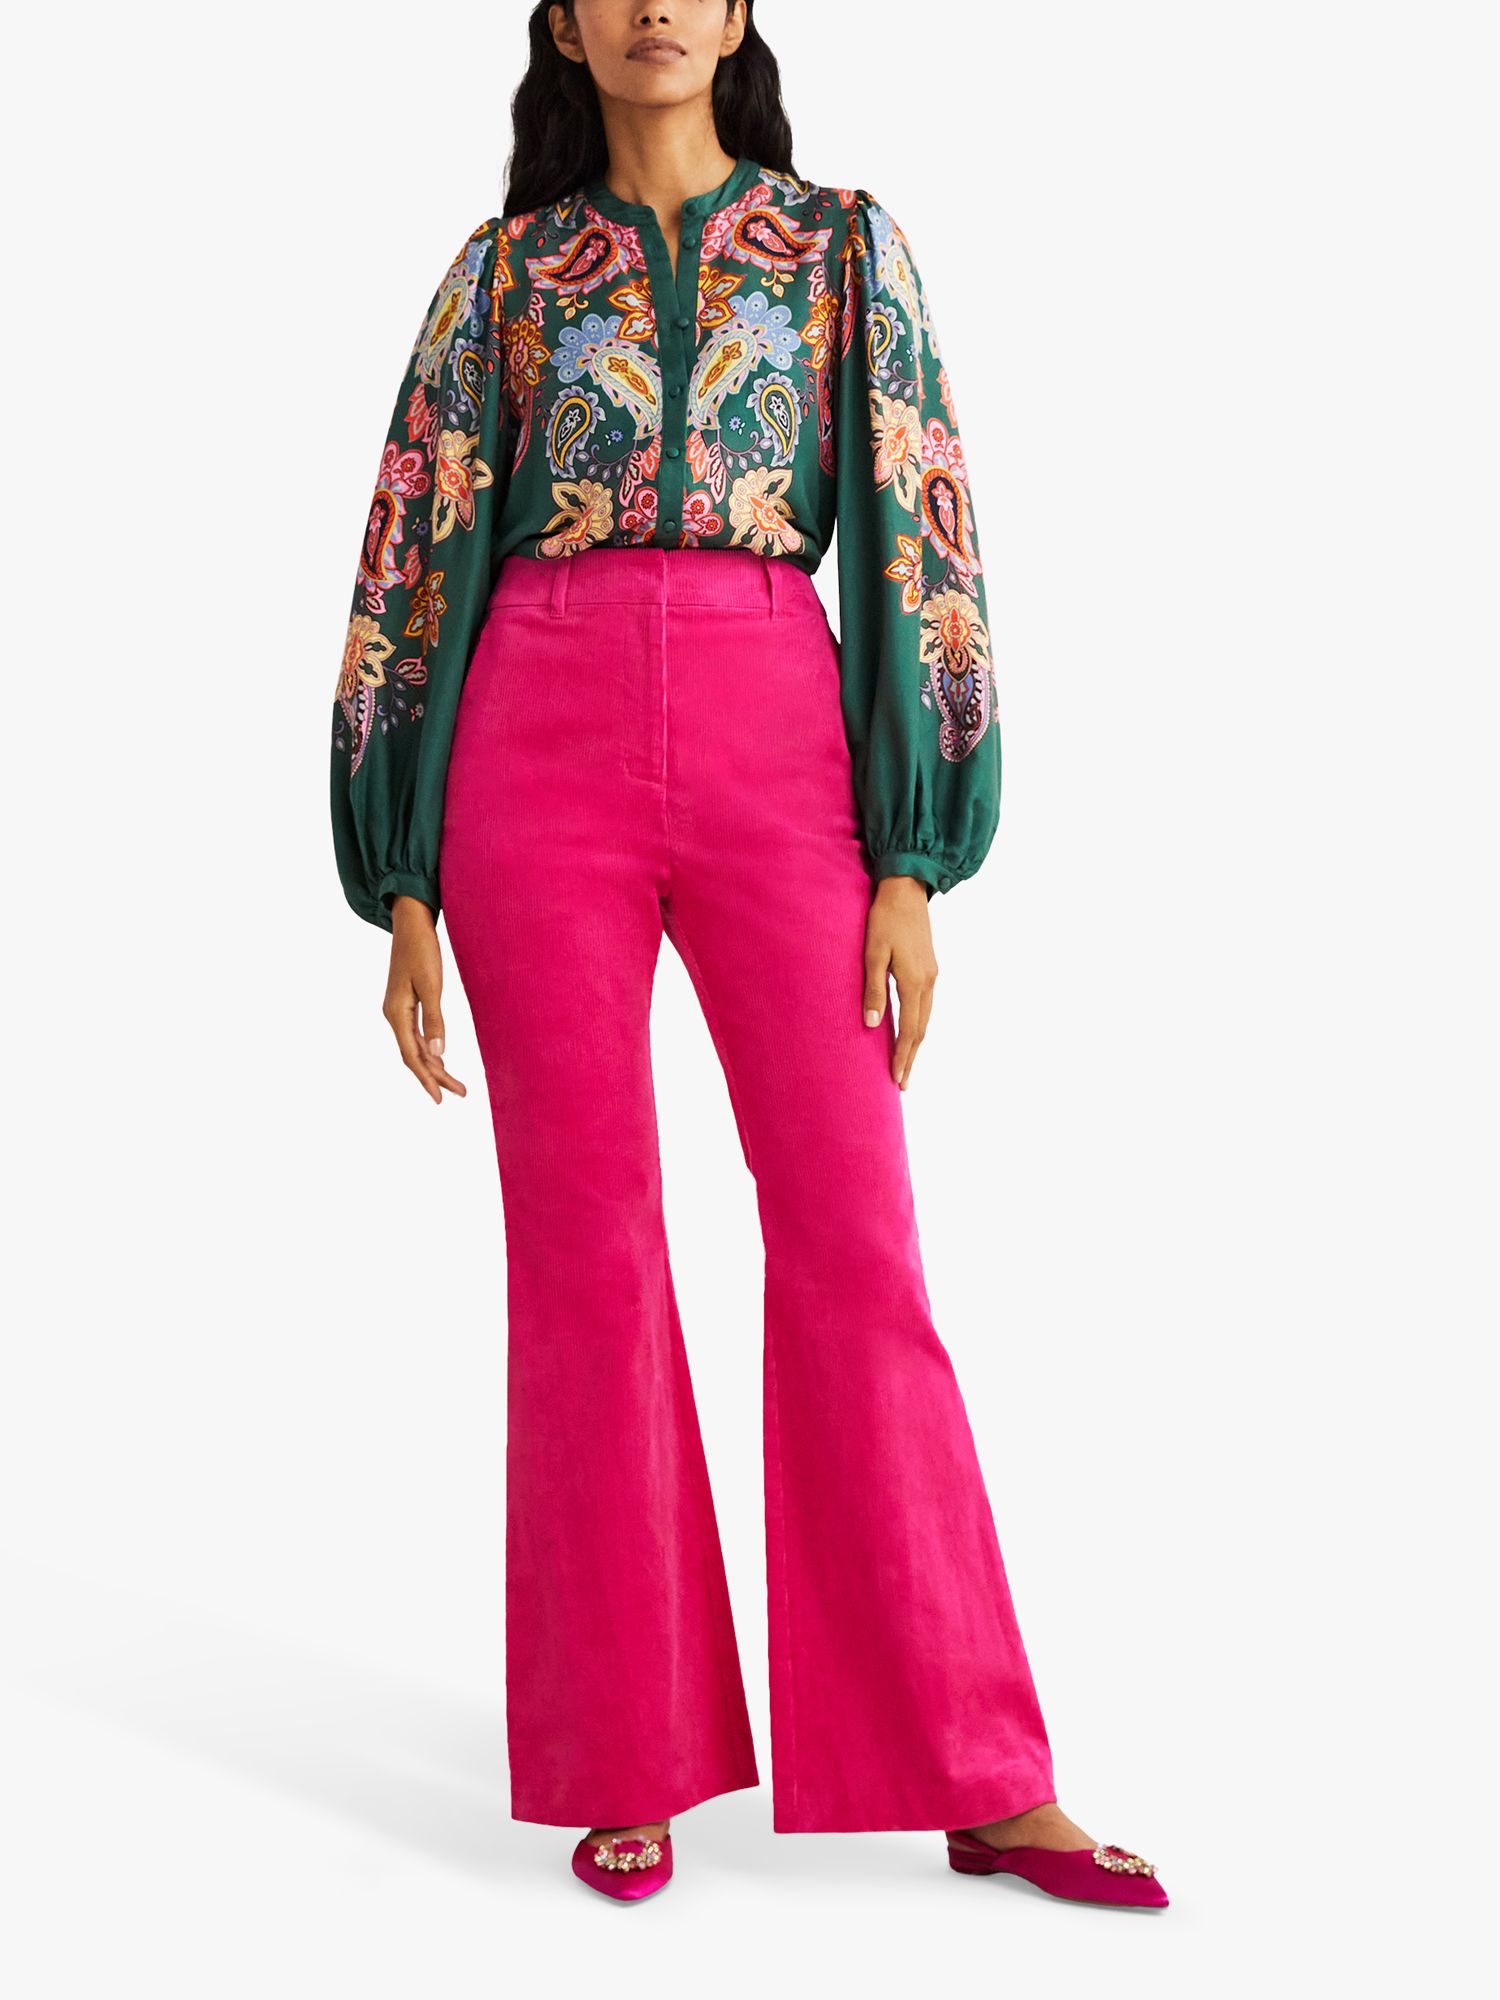 Boden Fitted Flared Trousers, Wild Watermelon Pink at John Lewis & Partners